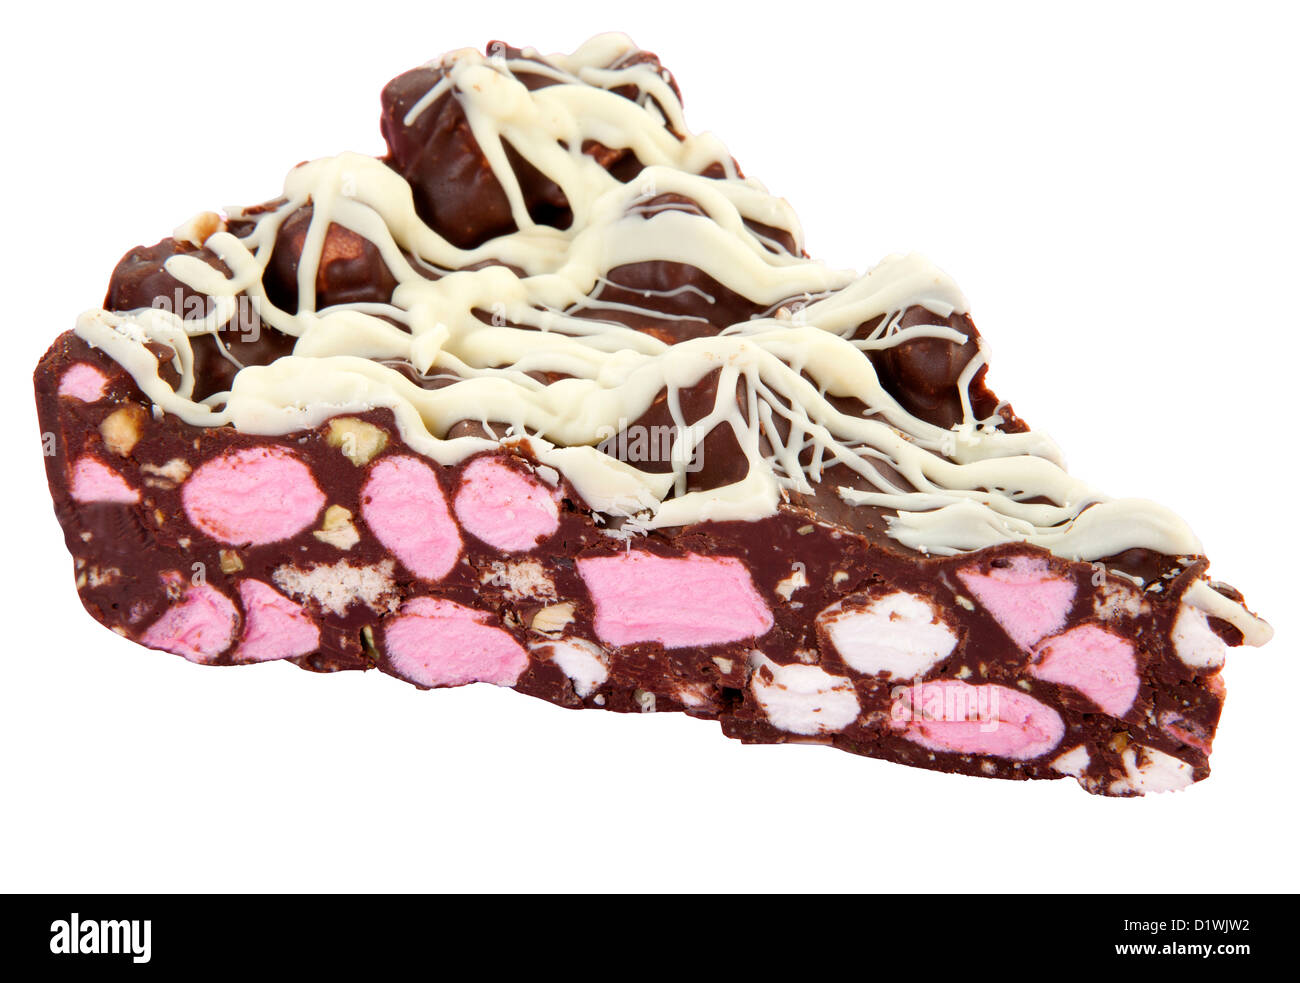 CUT OUT OF ROCKY ROAD PIE SLICE Stock Photo